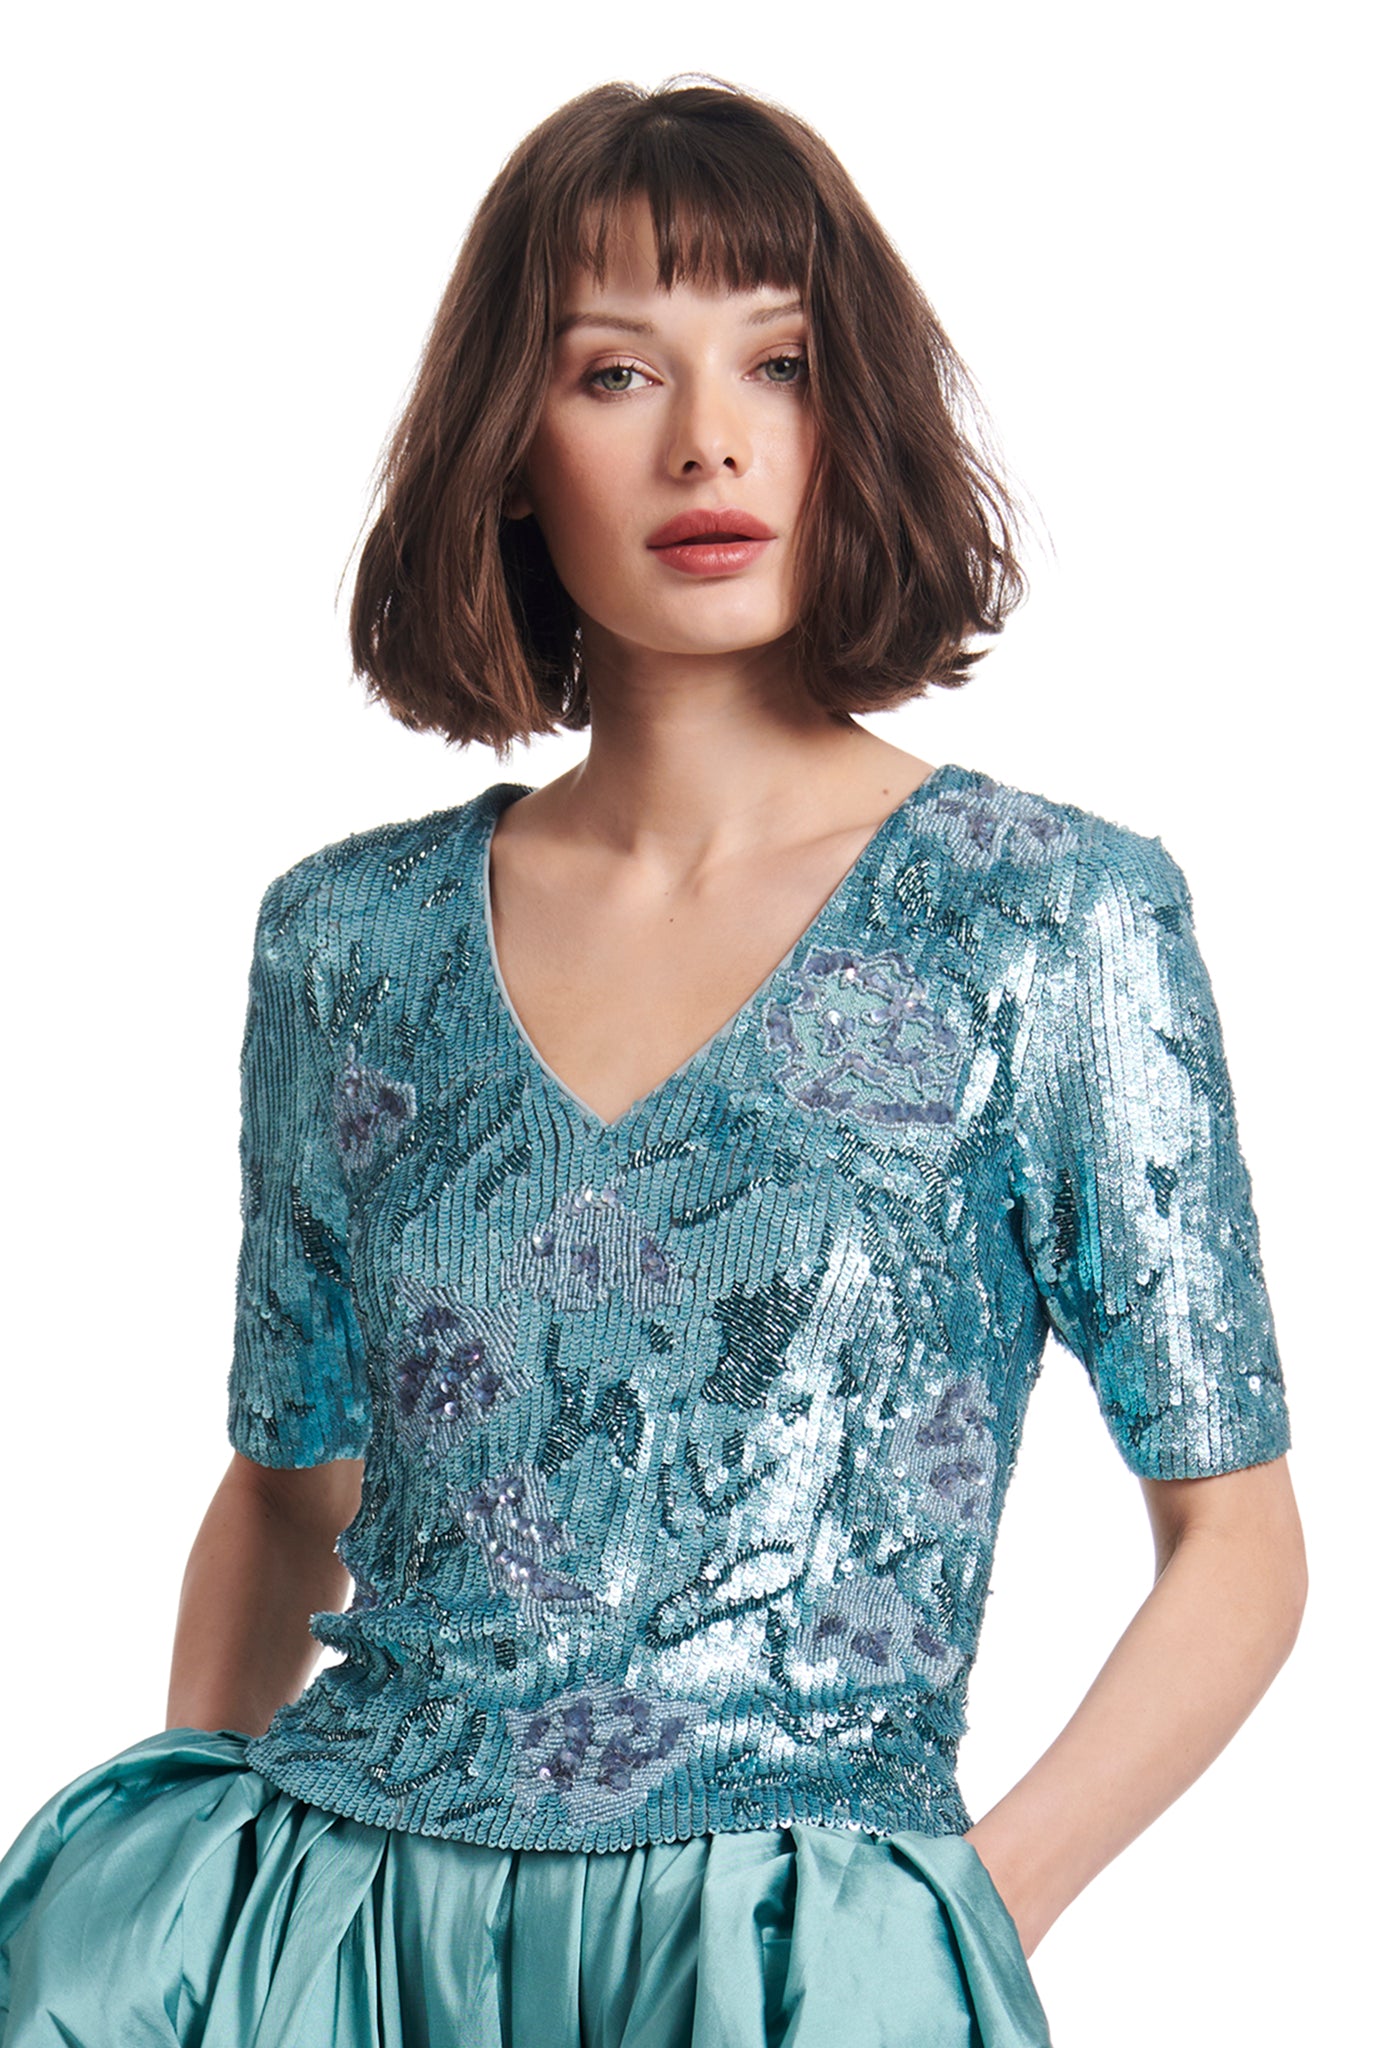 V-NECK SEQUINED FLORAL BEADED STRETCH TOP